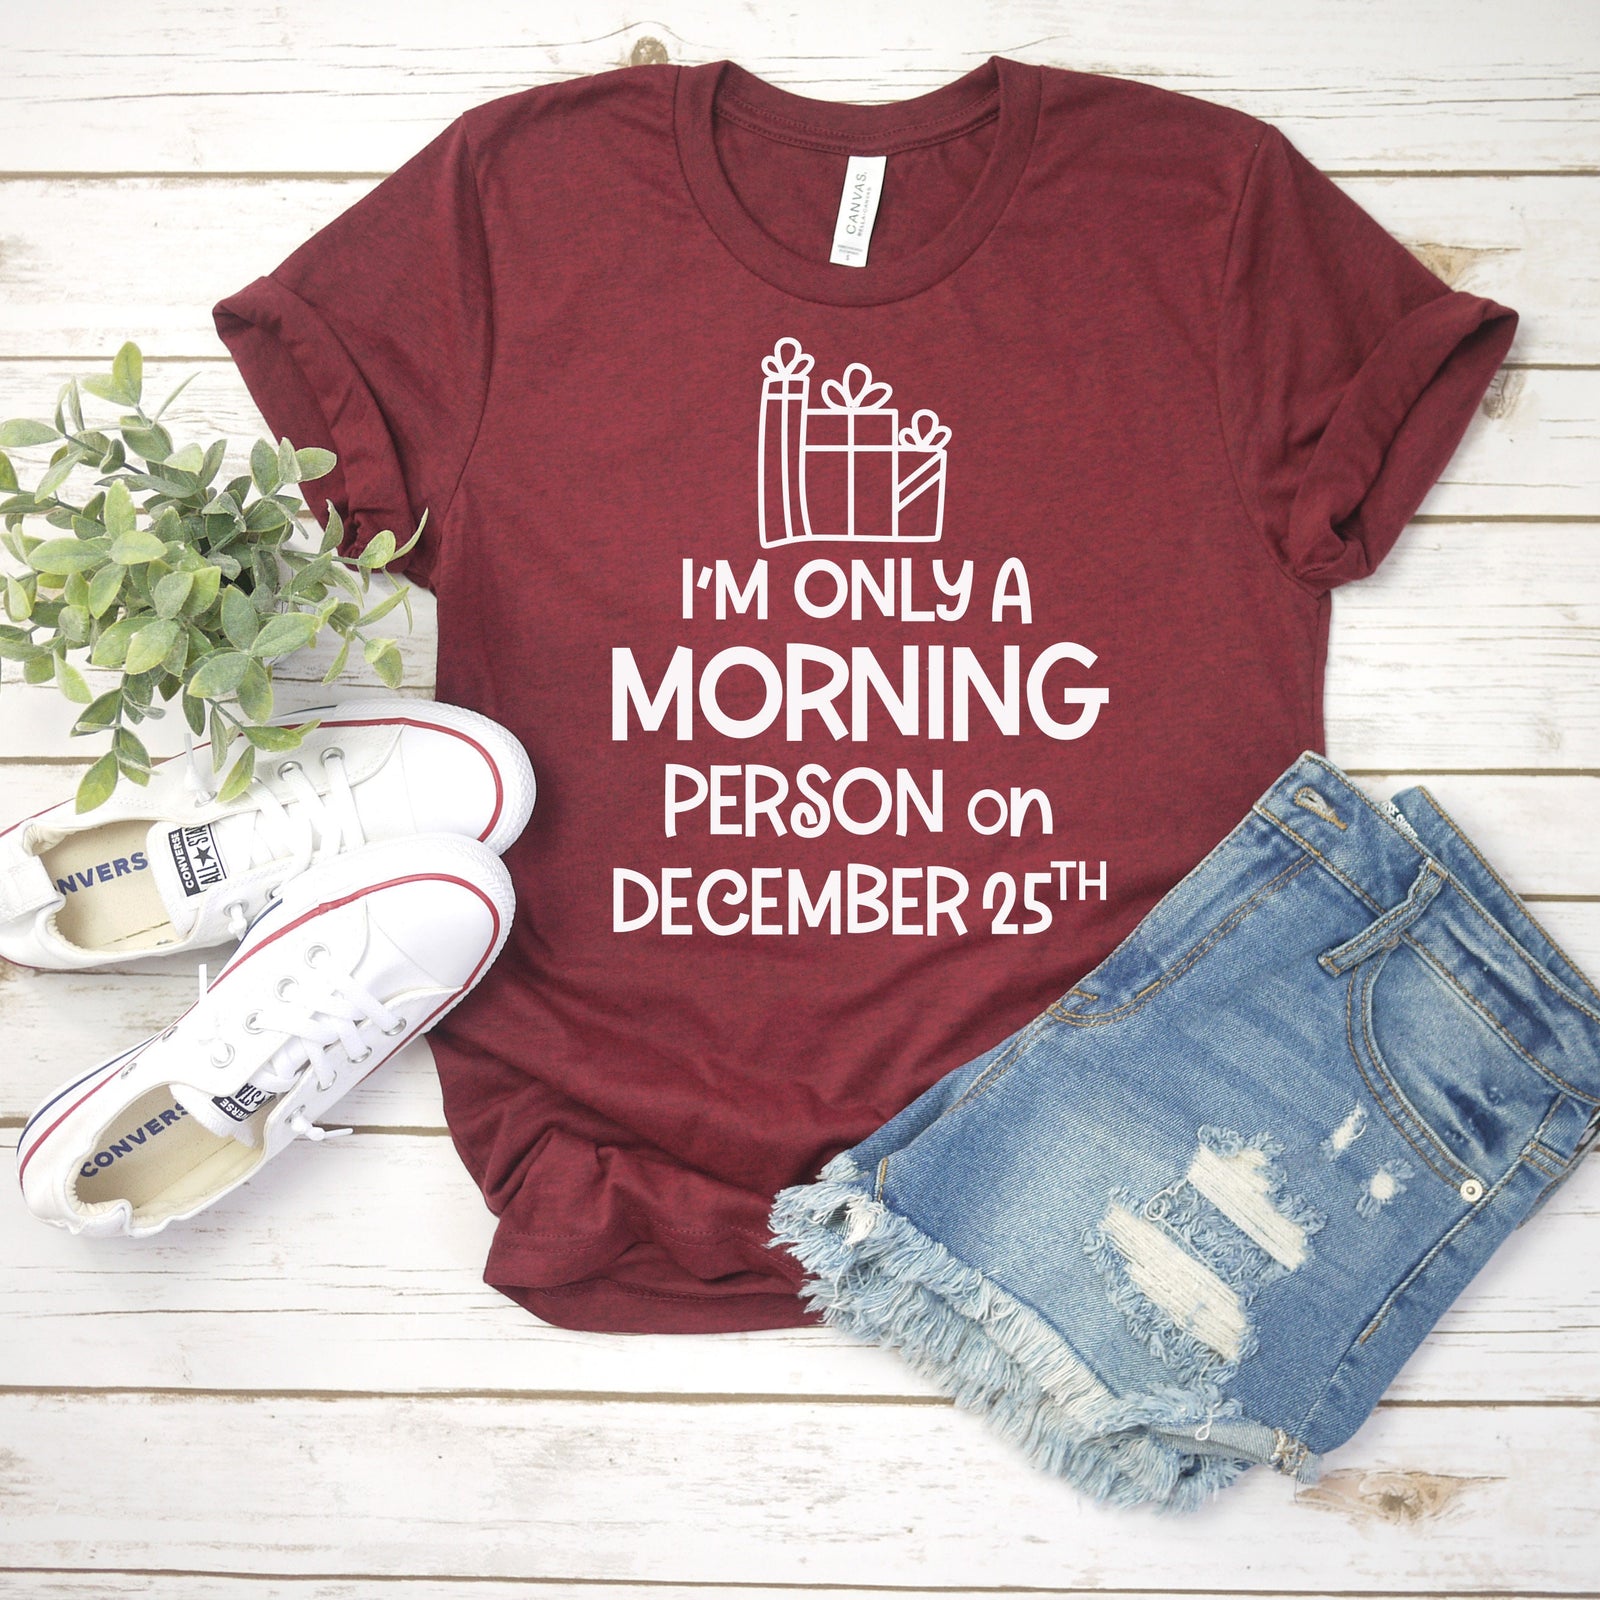 I'm Only a Morning Person on Dec 25th Christmas T Shirt - Funny X-Mas T Shirt - Christmas Shirt Gift